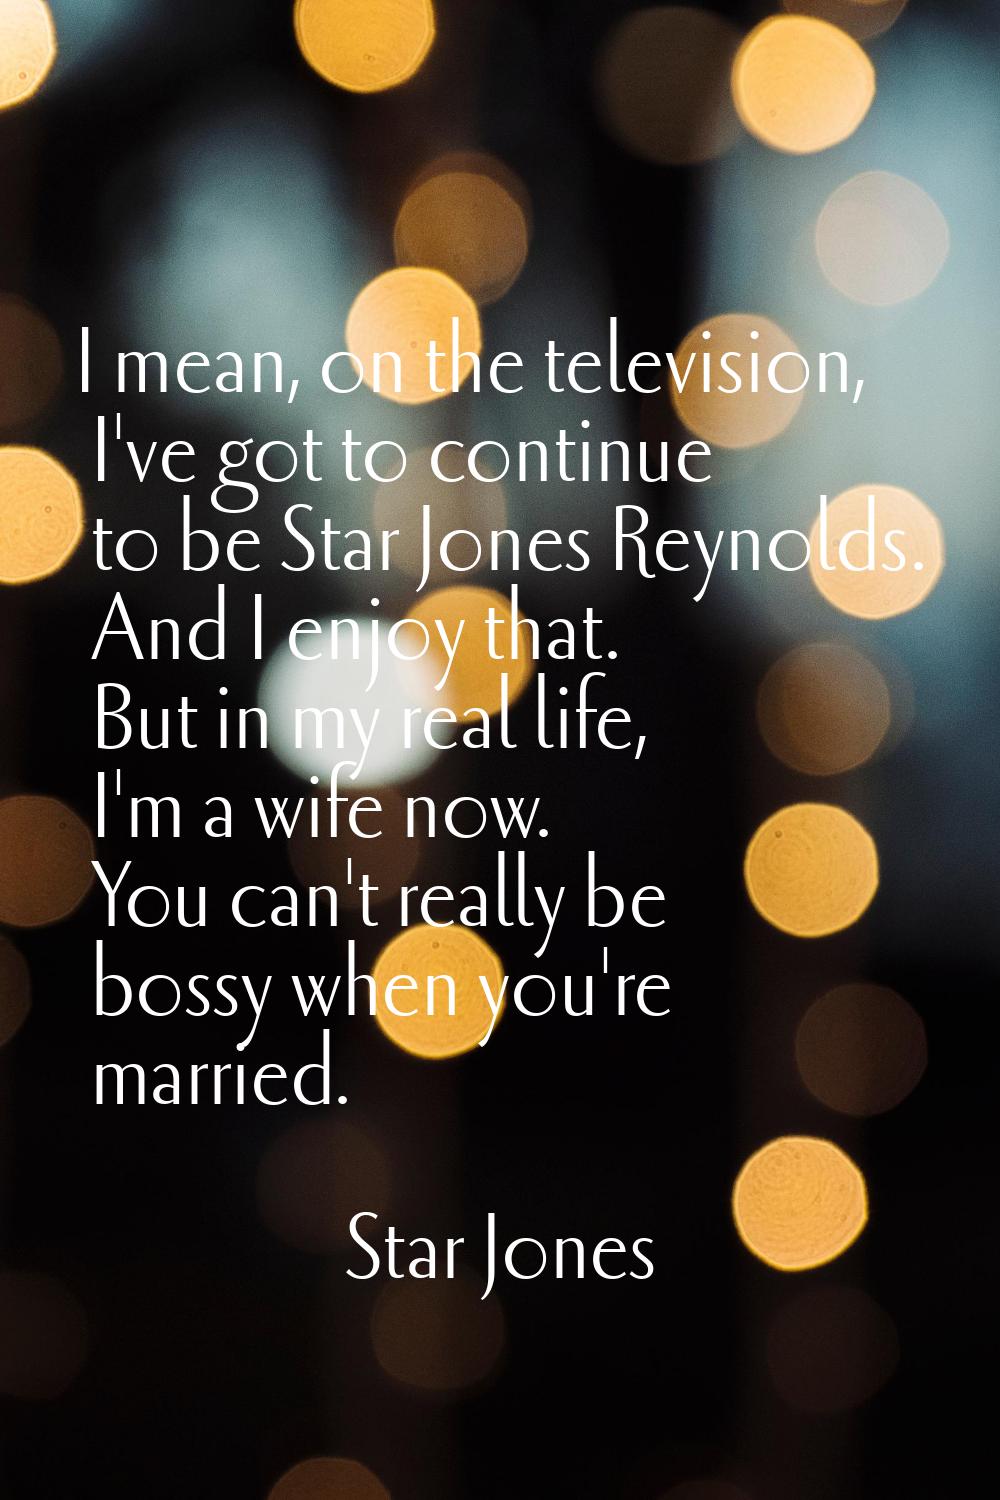 I mean, on the television, I've got to continue to be Star Jones Reynolds. And I enjoy that. But in